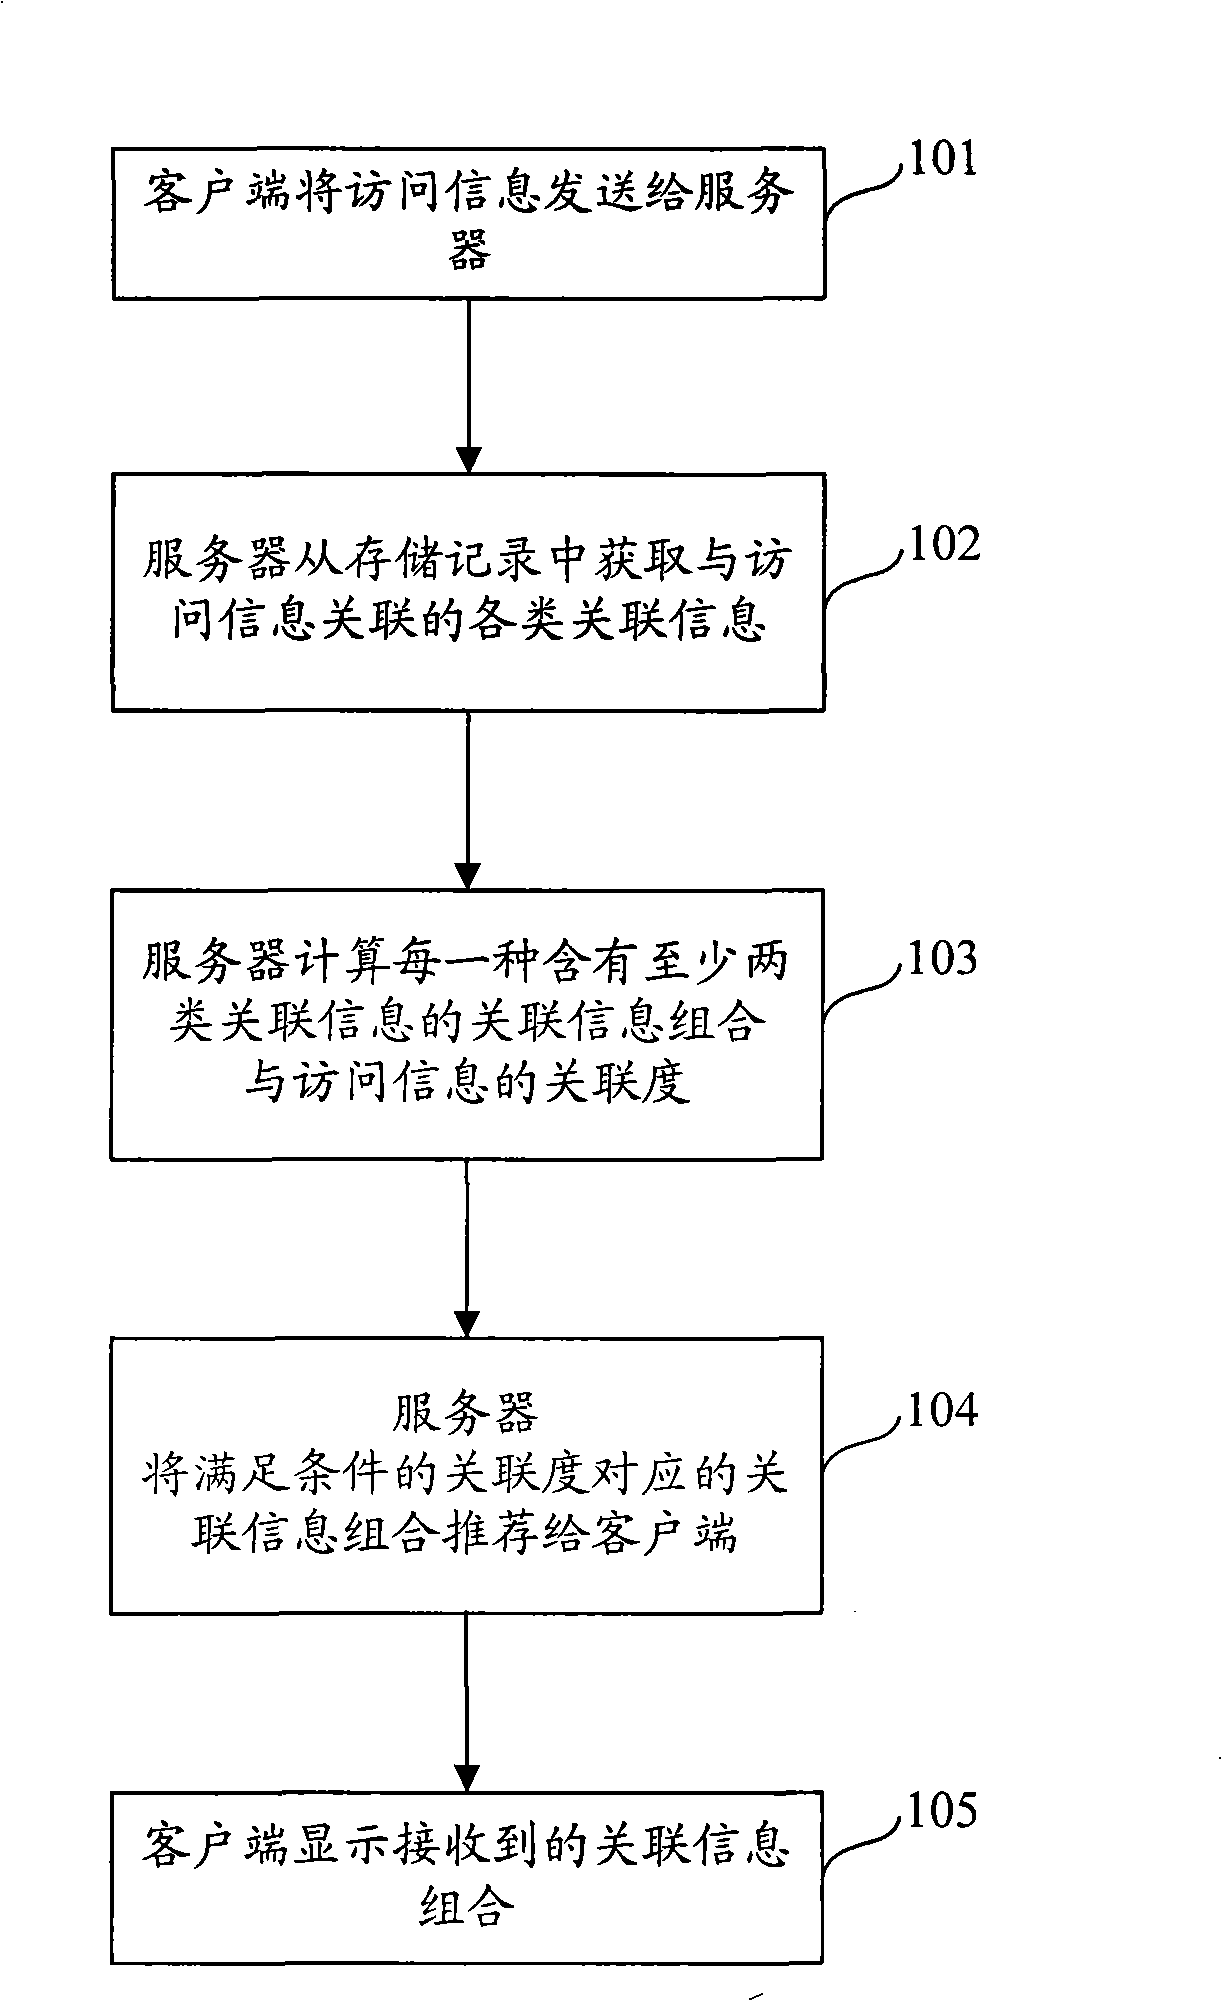 Method and apparatus of recommending information